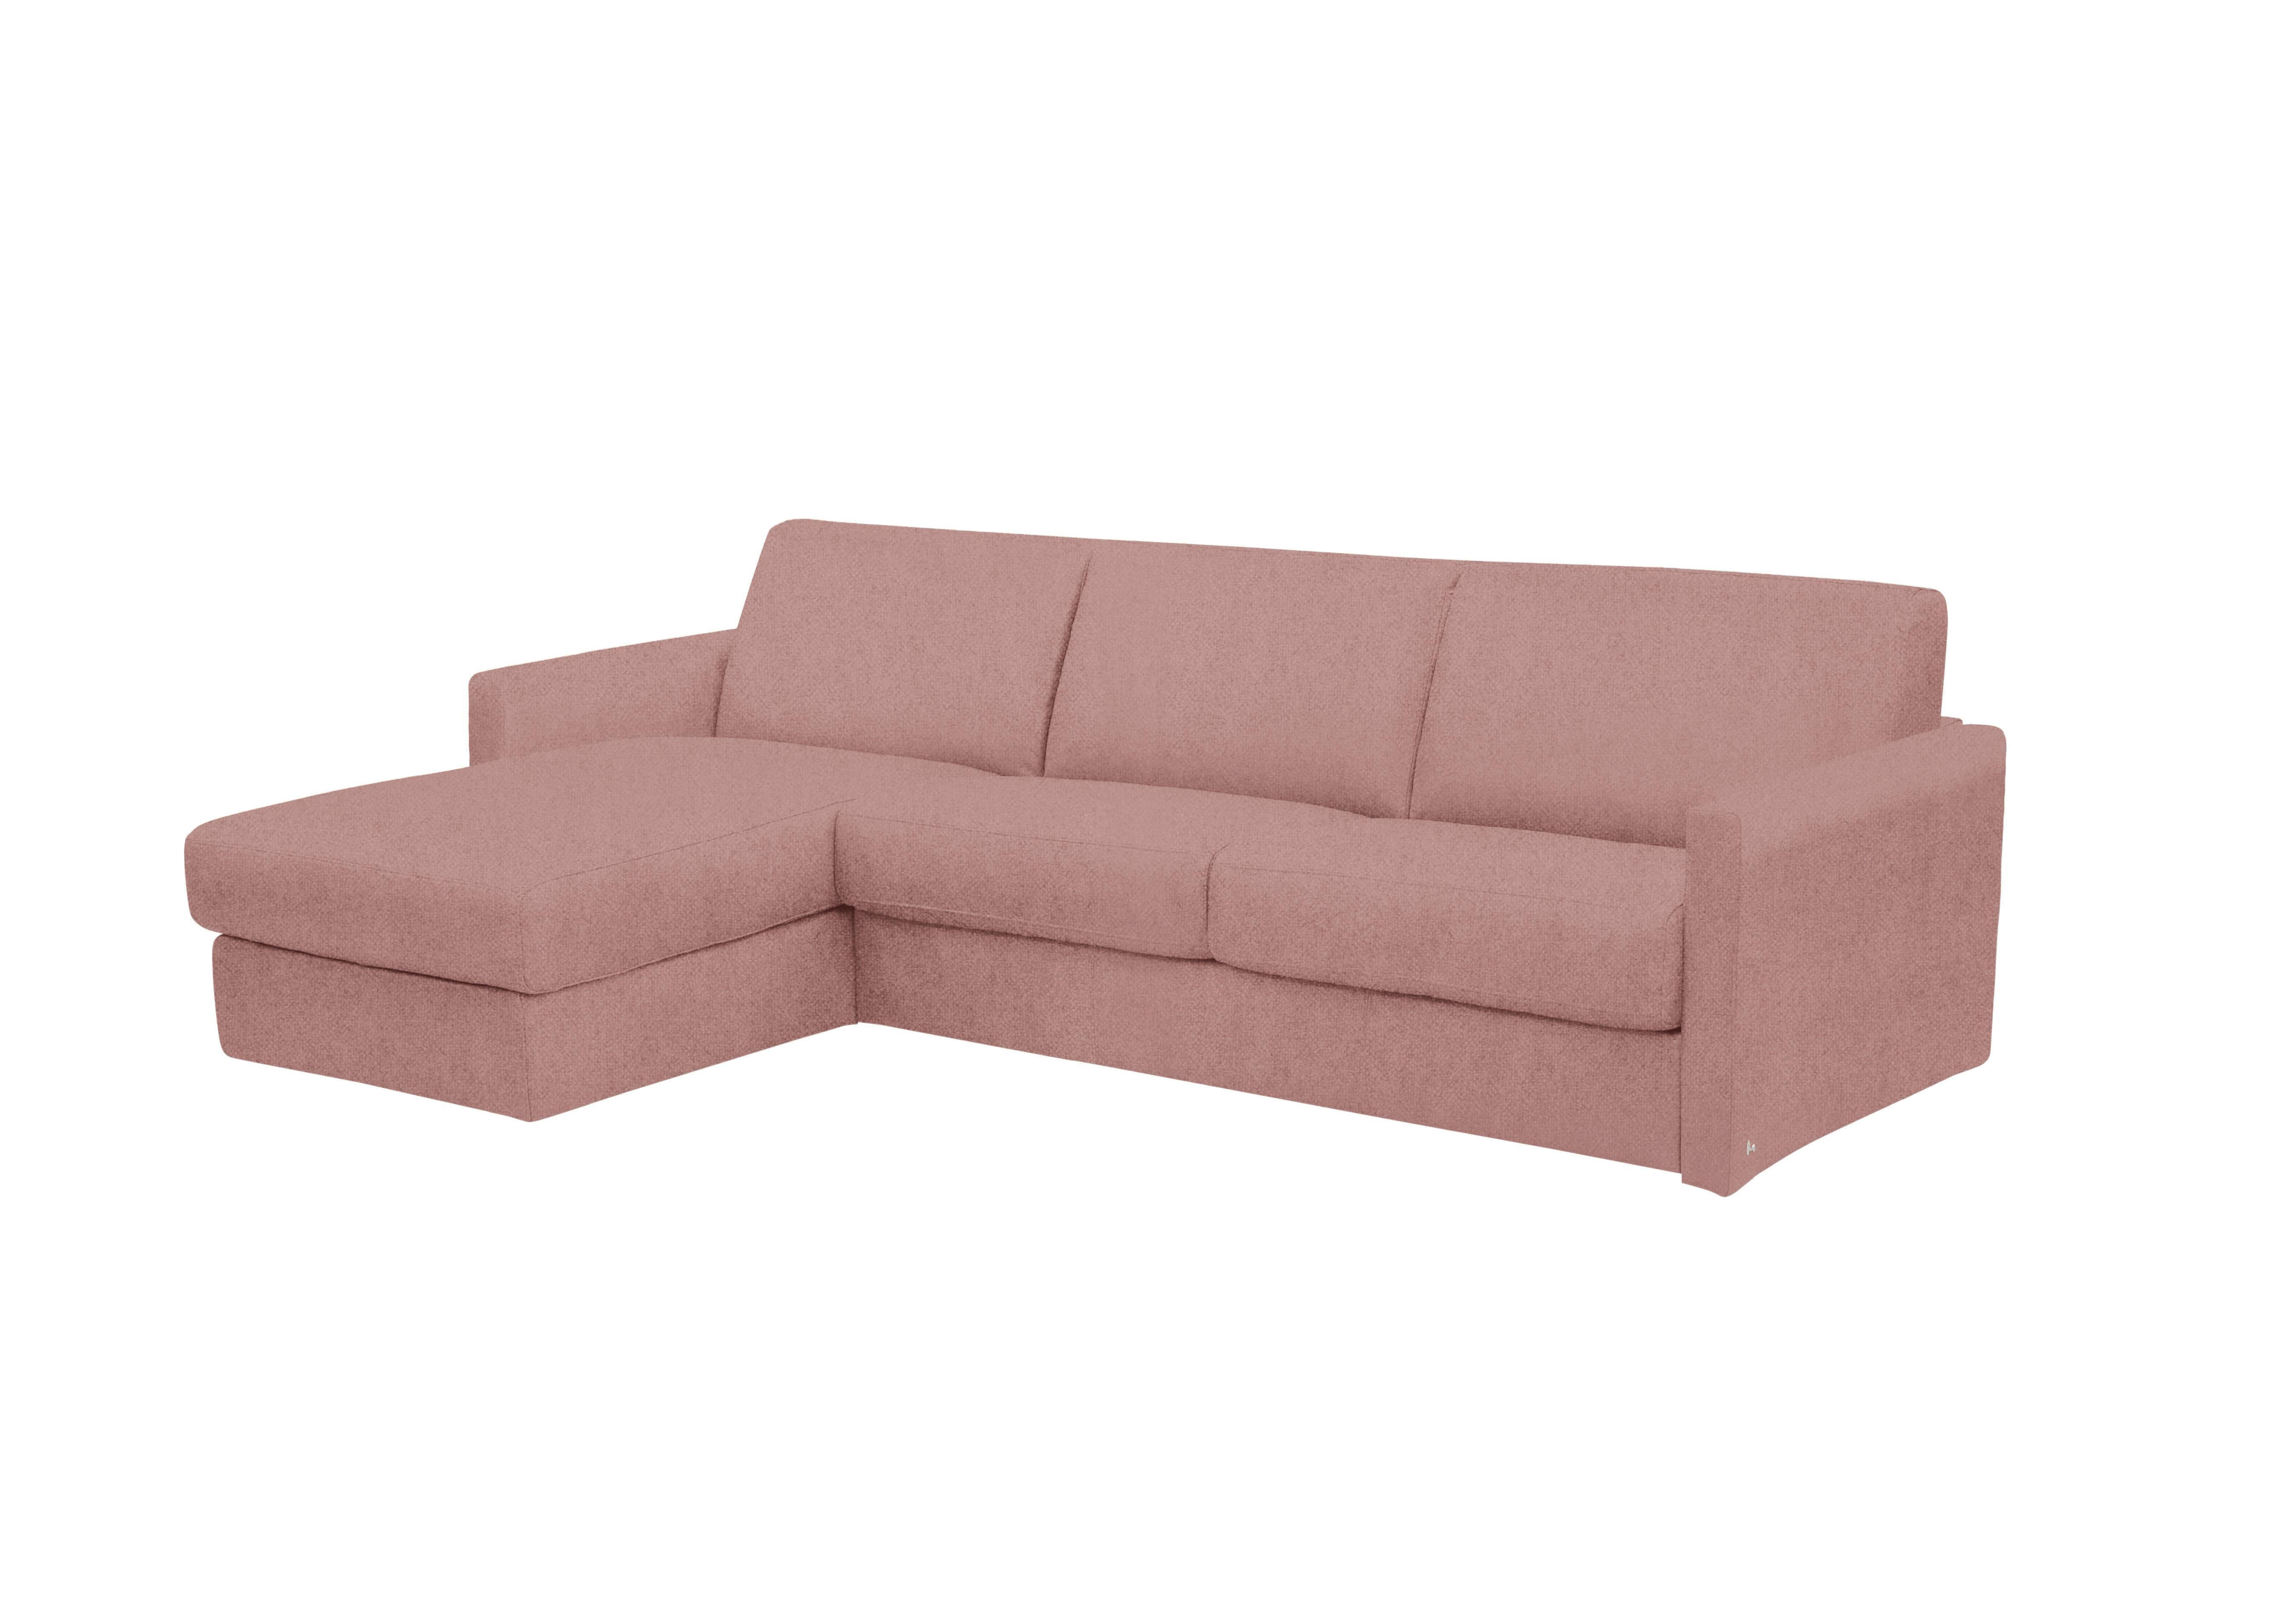 Alcova 3 Seater Fabric Sofa Bed with Storage Chaise with Slim Arms in Fuente Coral on Furniture Village